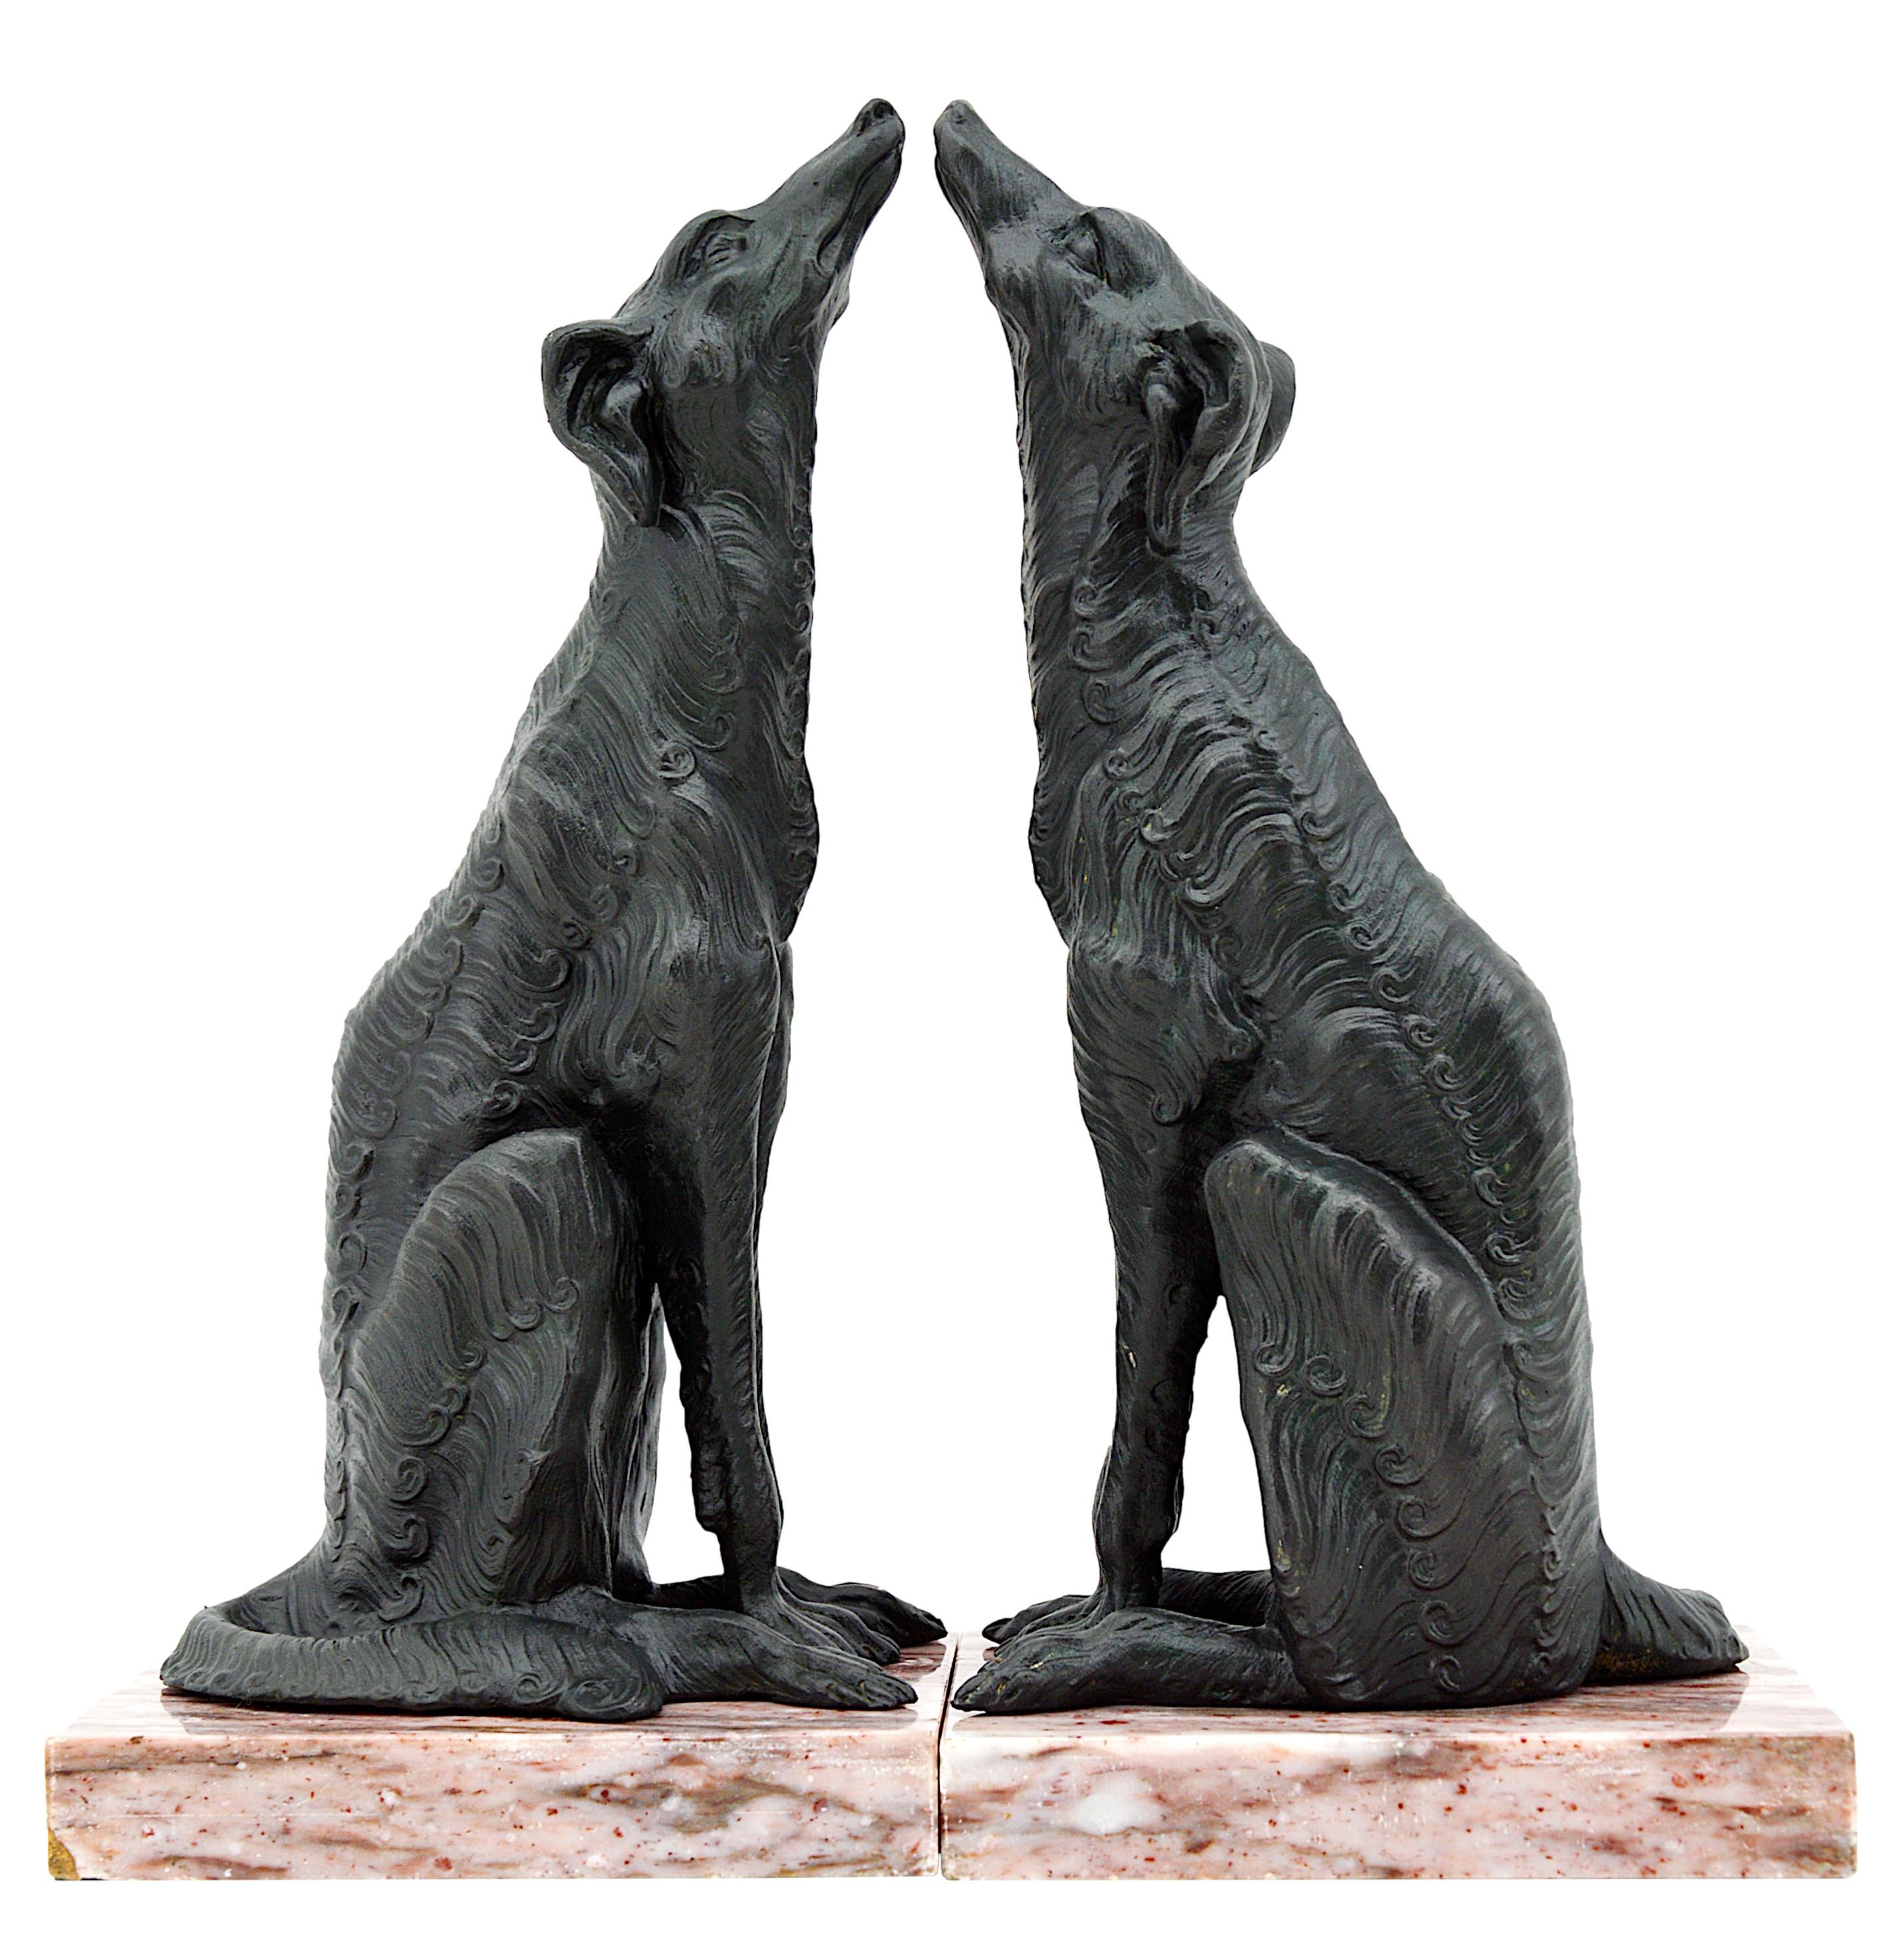 French Art Deco bookends, France, ca.1920s. Greyhounds. Patinated green bronze spelter dogs. Marble bases. Measures: height: 9.6